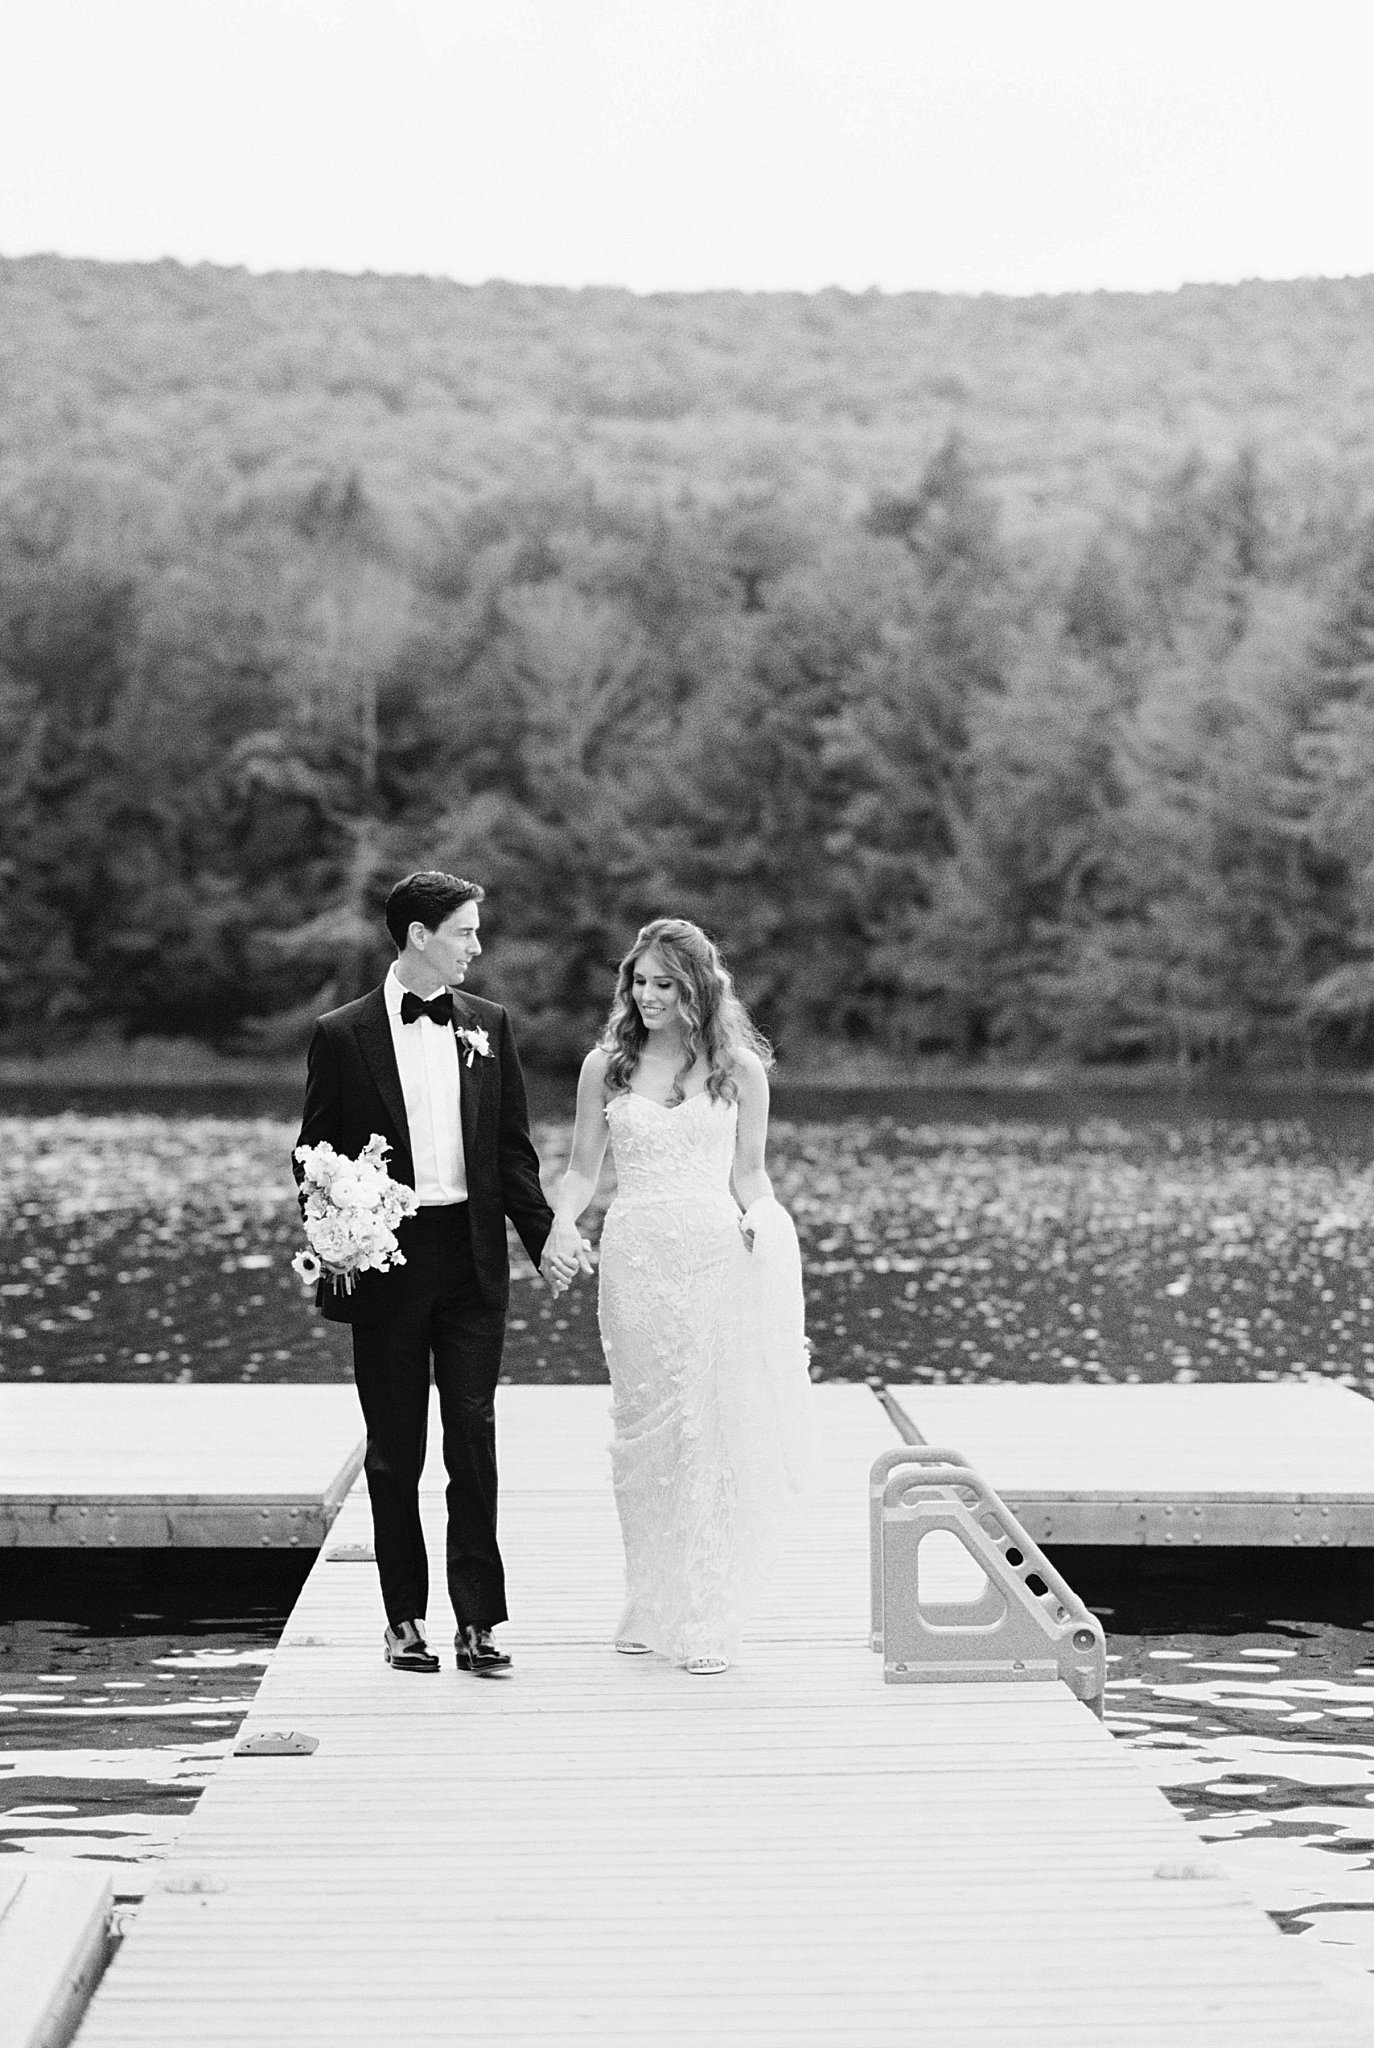 newlyweds hold hands as they walk on dock at lake by Lynne Reznick Photography 